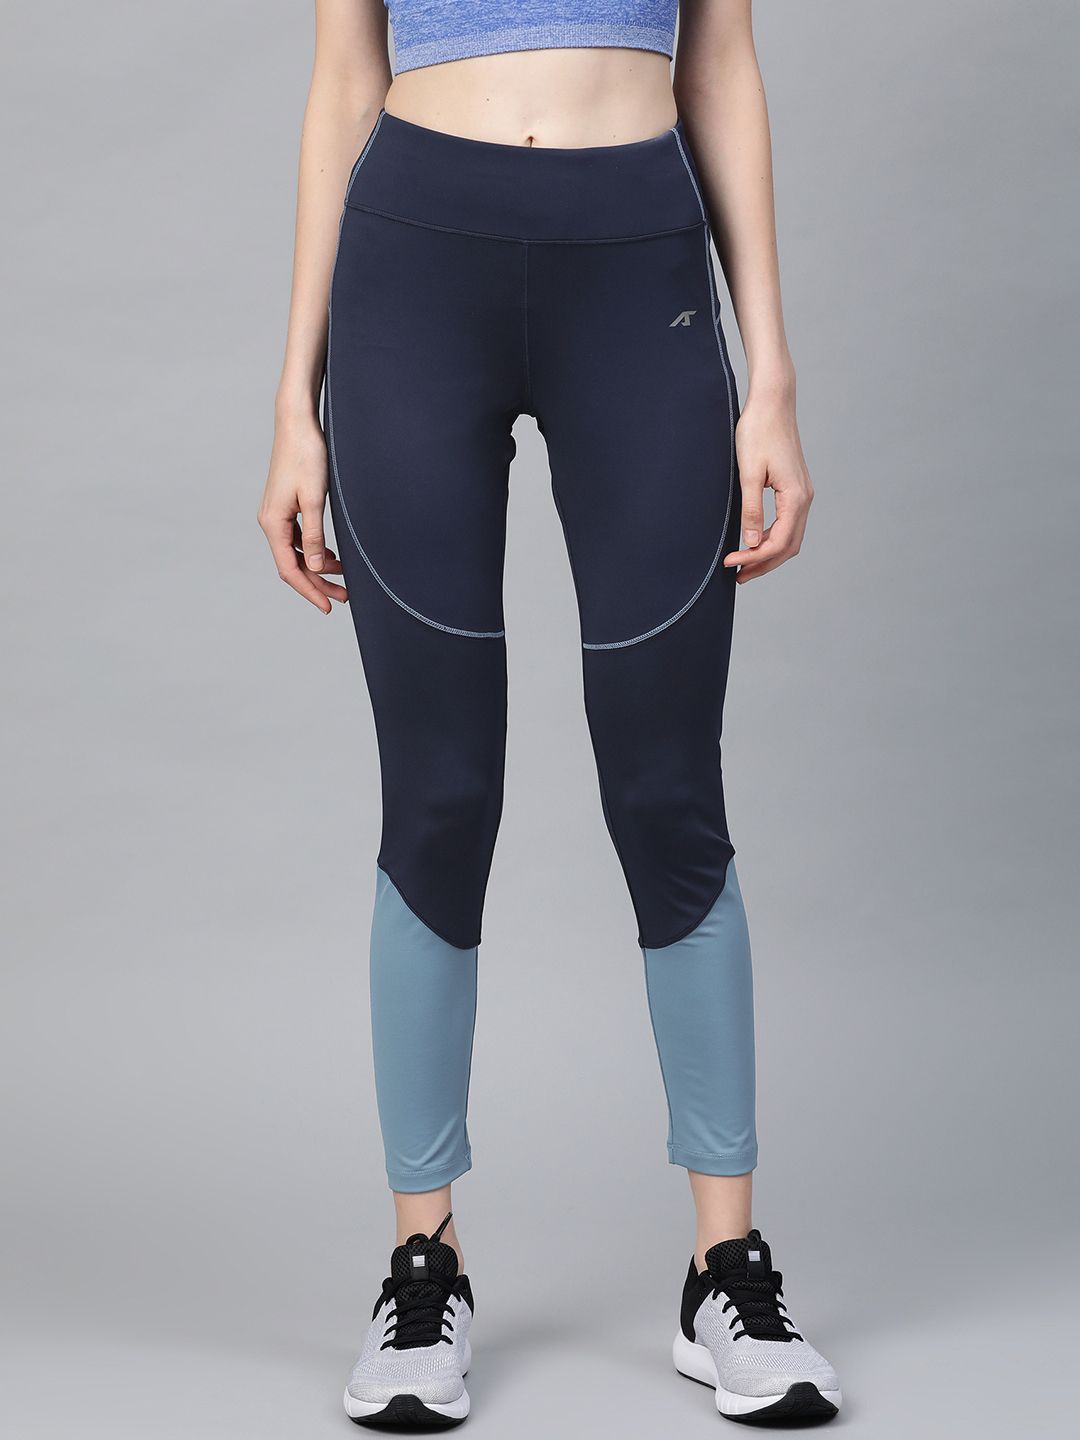 Alcis Women Navy Blue Secure Fit Colourblocked Cropped Training Tights Price in India